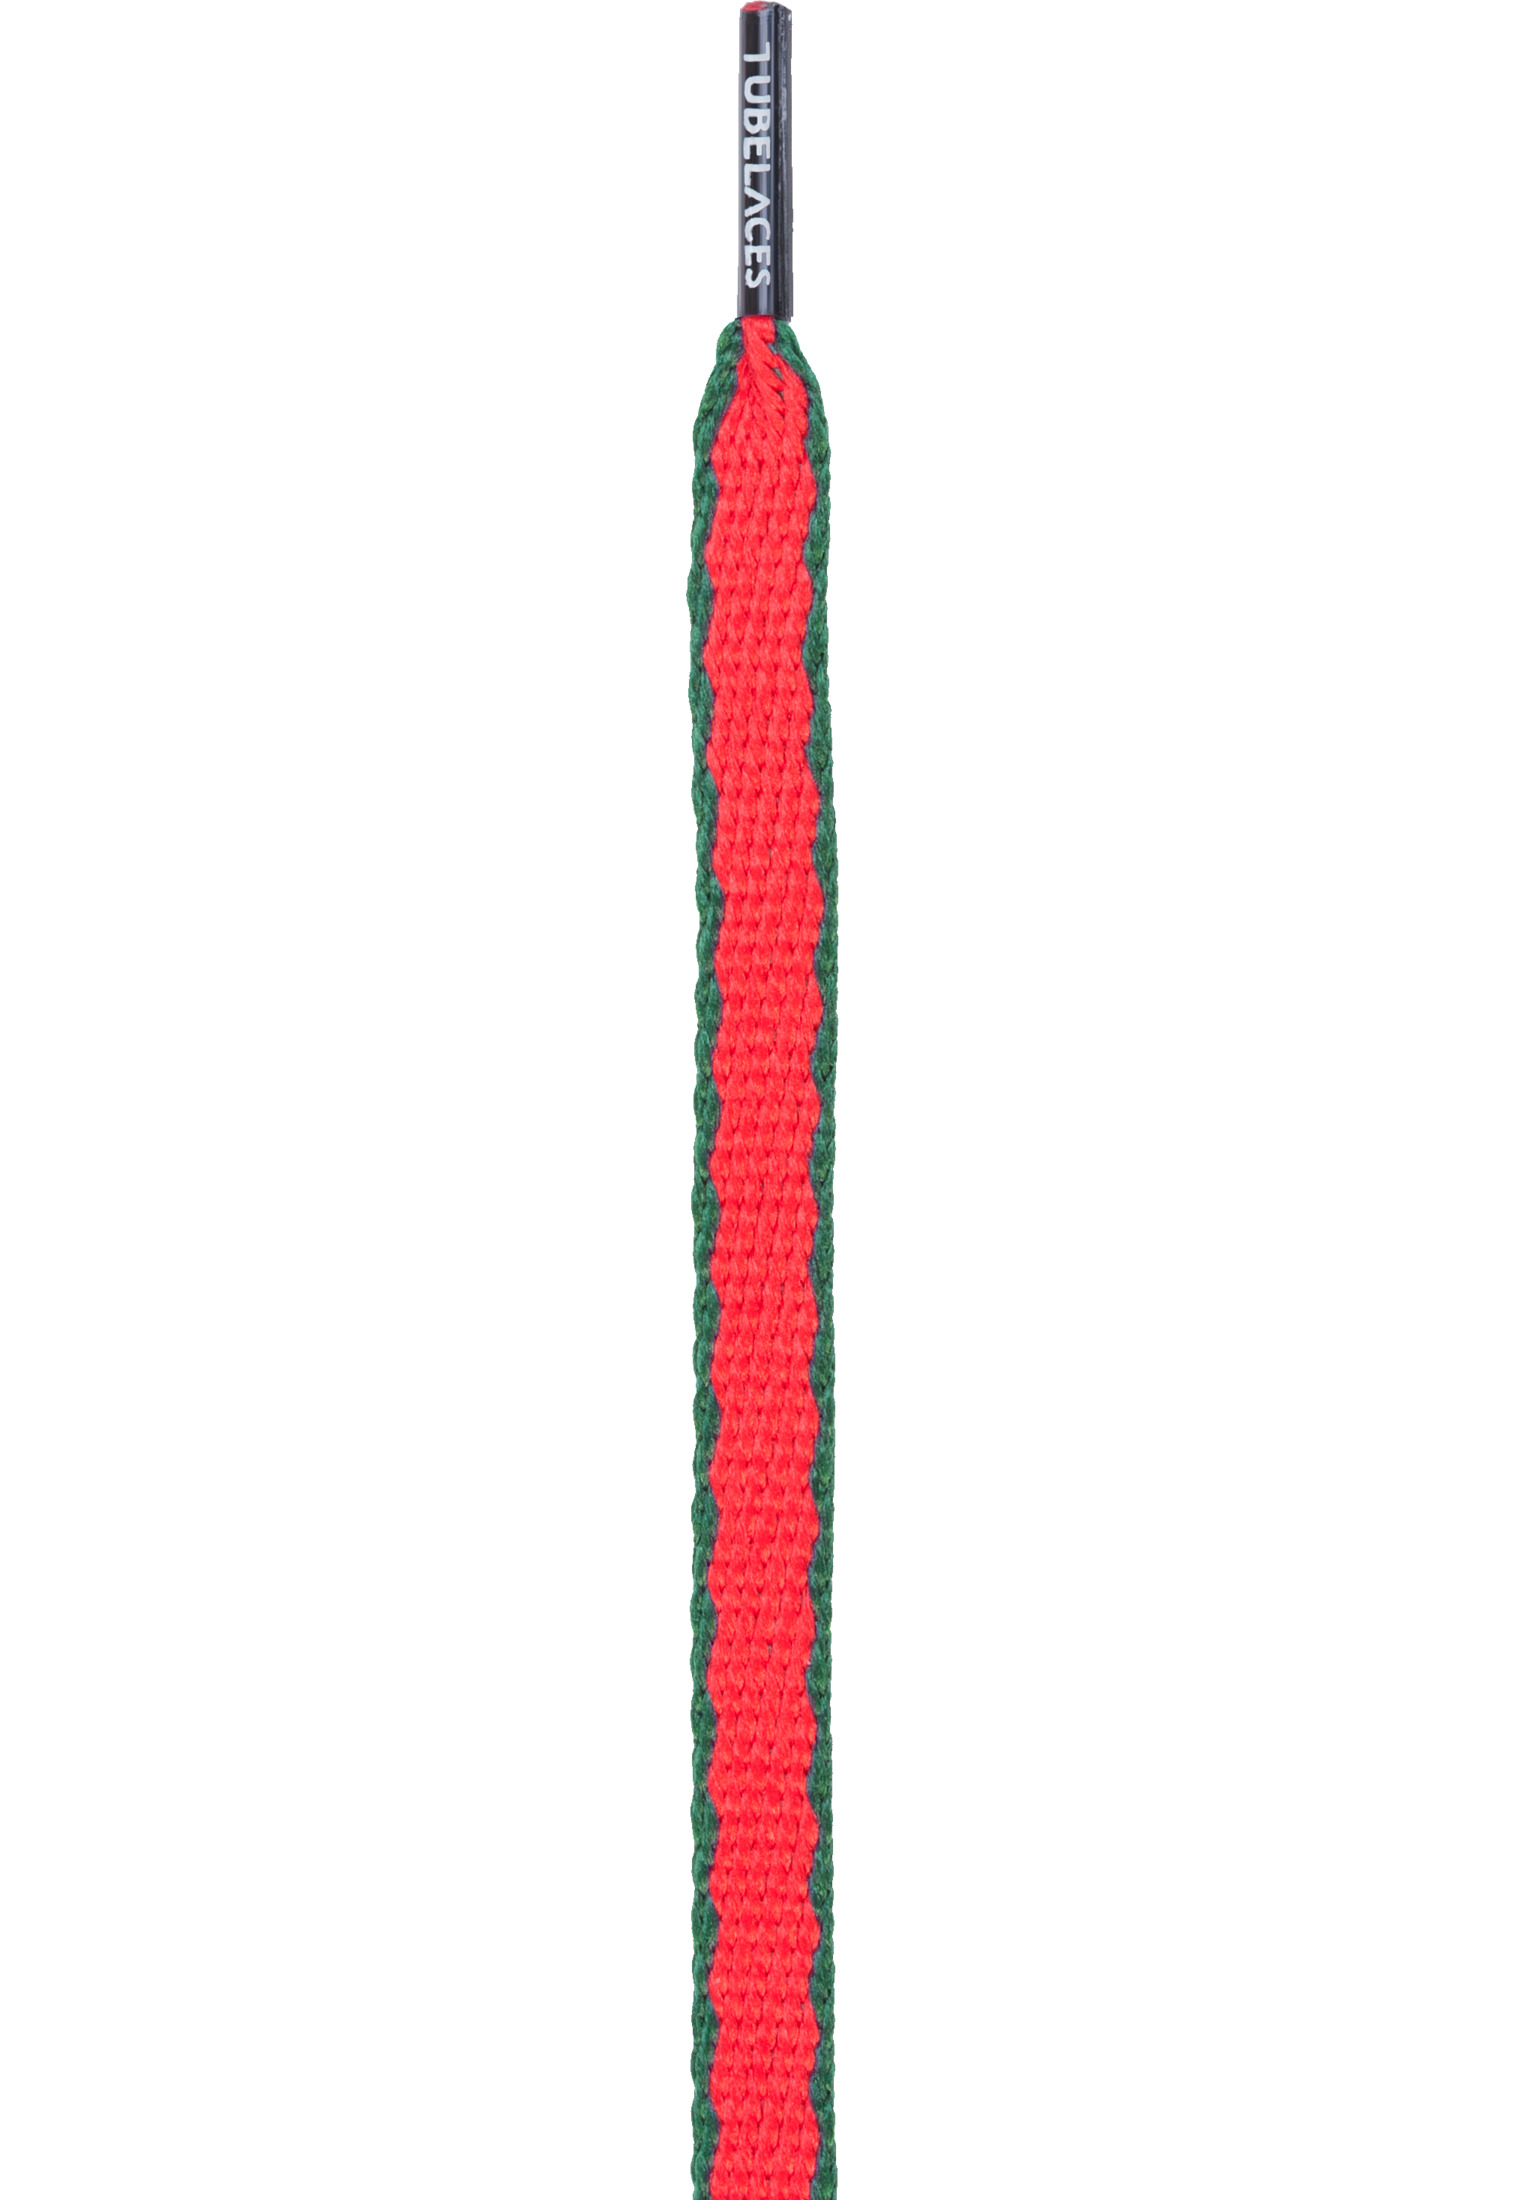 Laces Tubelaces Lux Pack (5er) in Farbe red/green